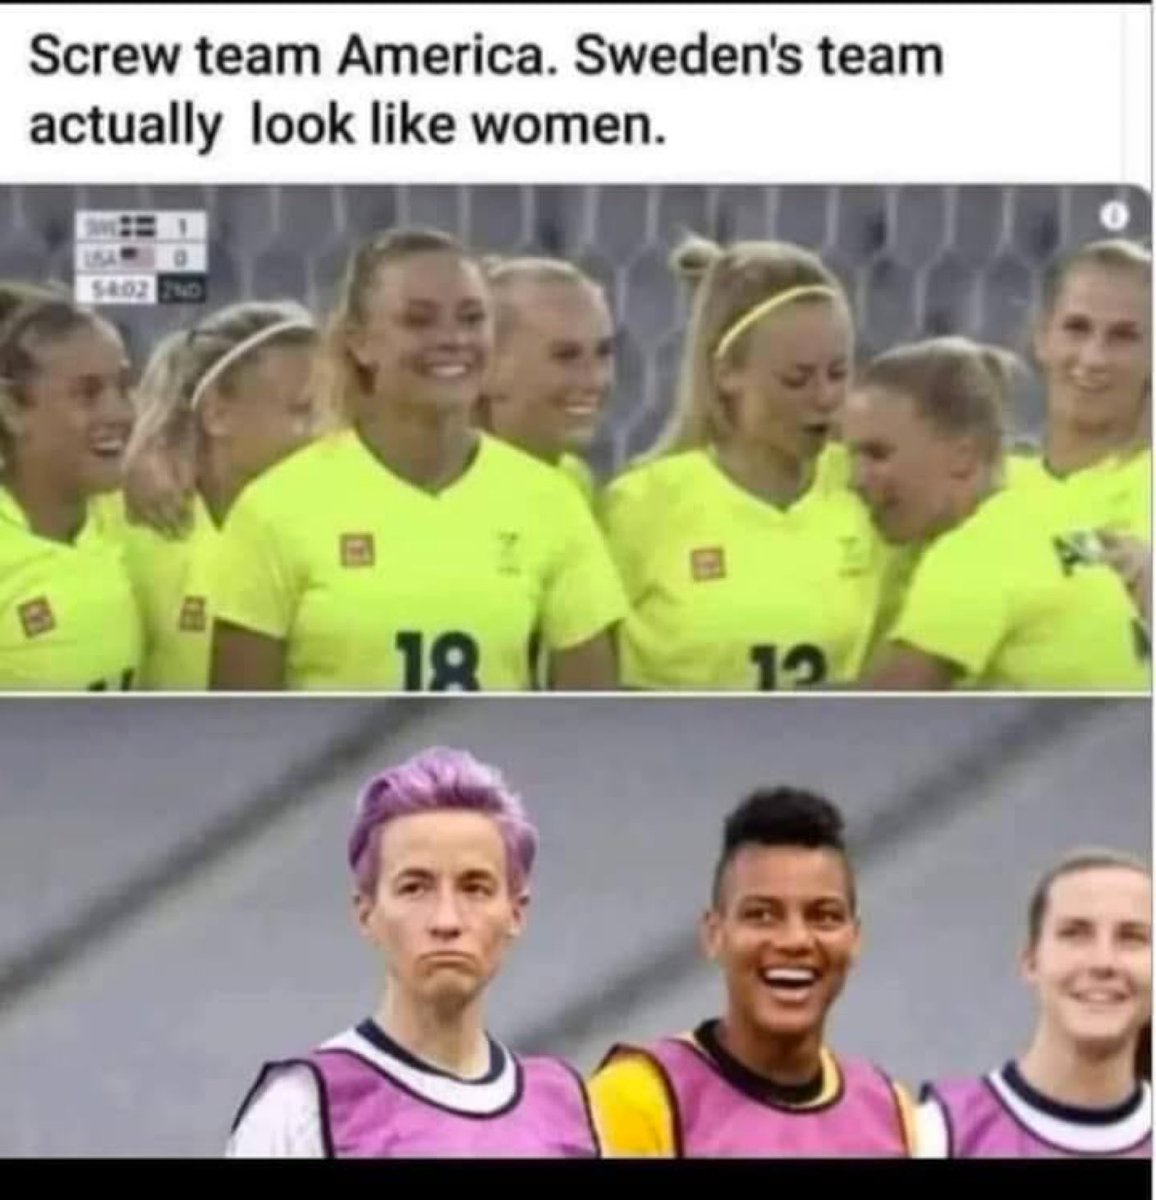 The USA “womens” soccer team seems to hate our country. Should we all instead support Sweden since at least they look like real women? 🤔